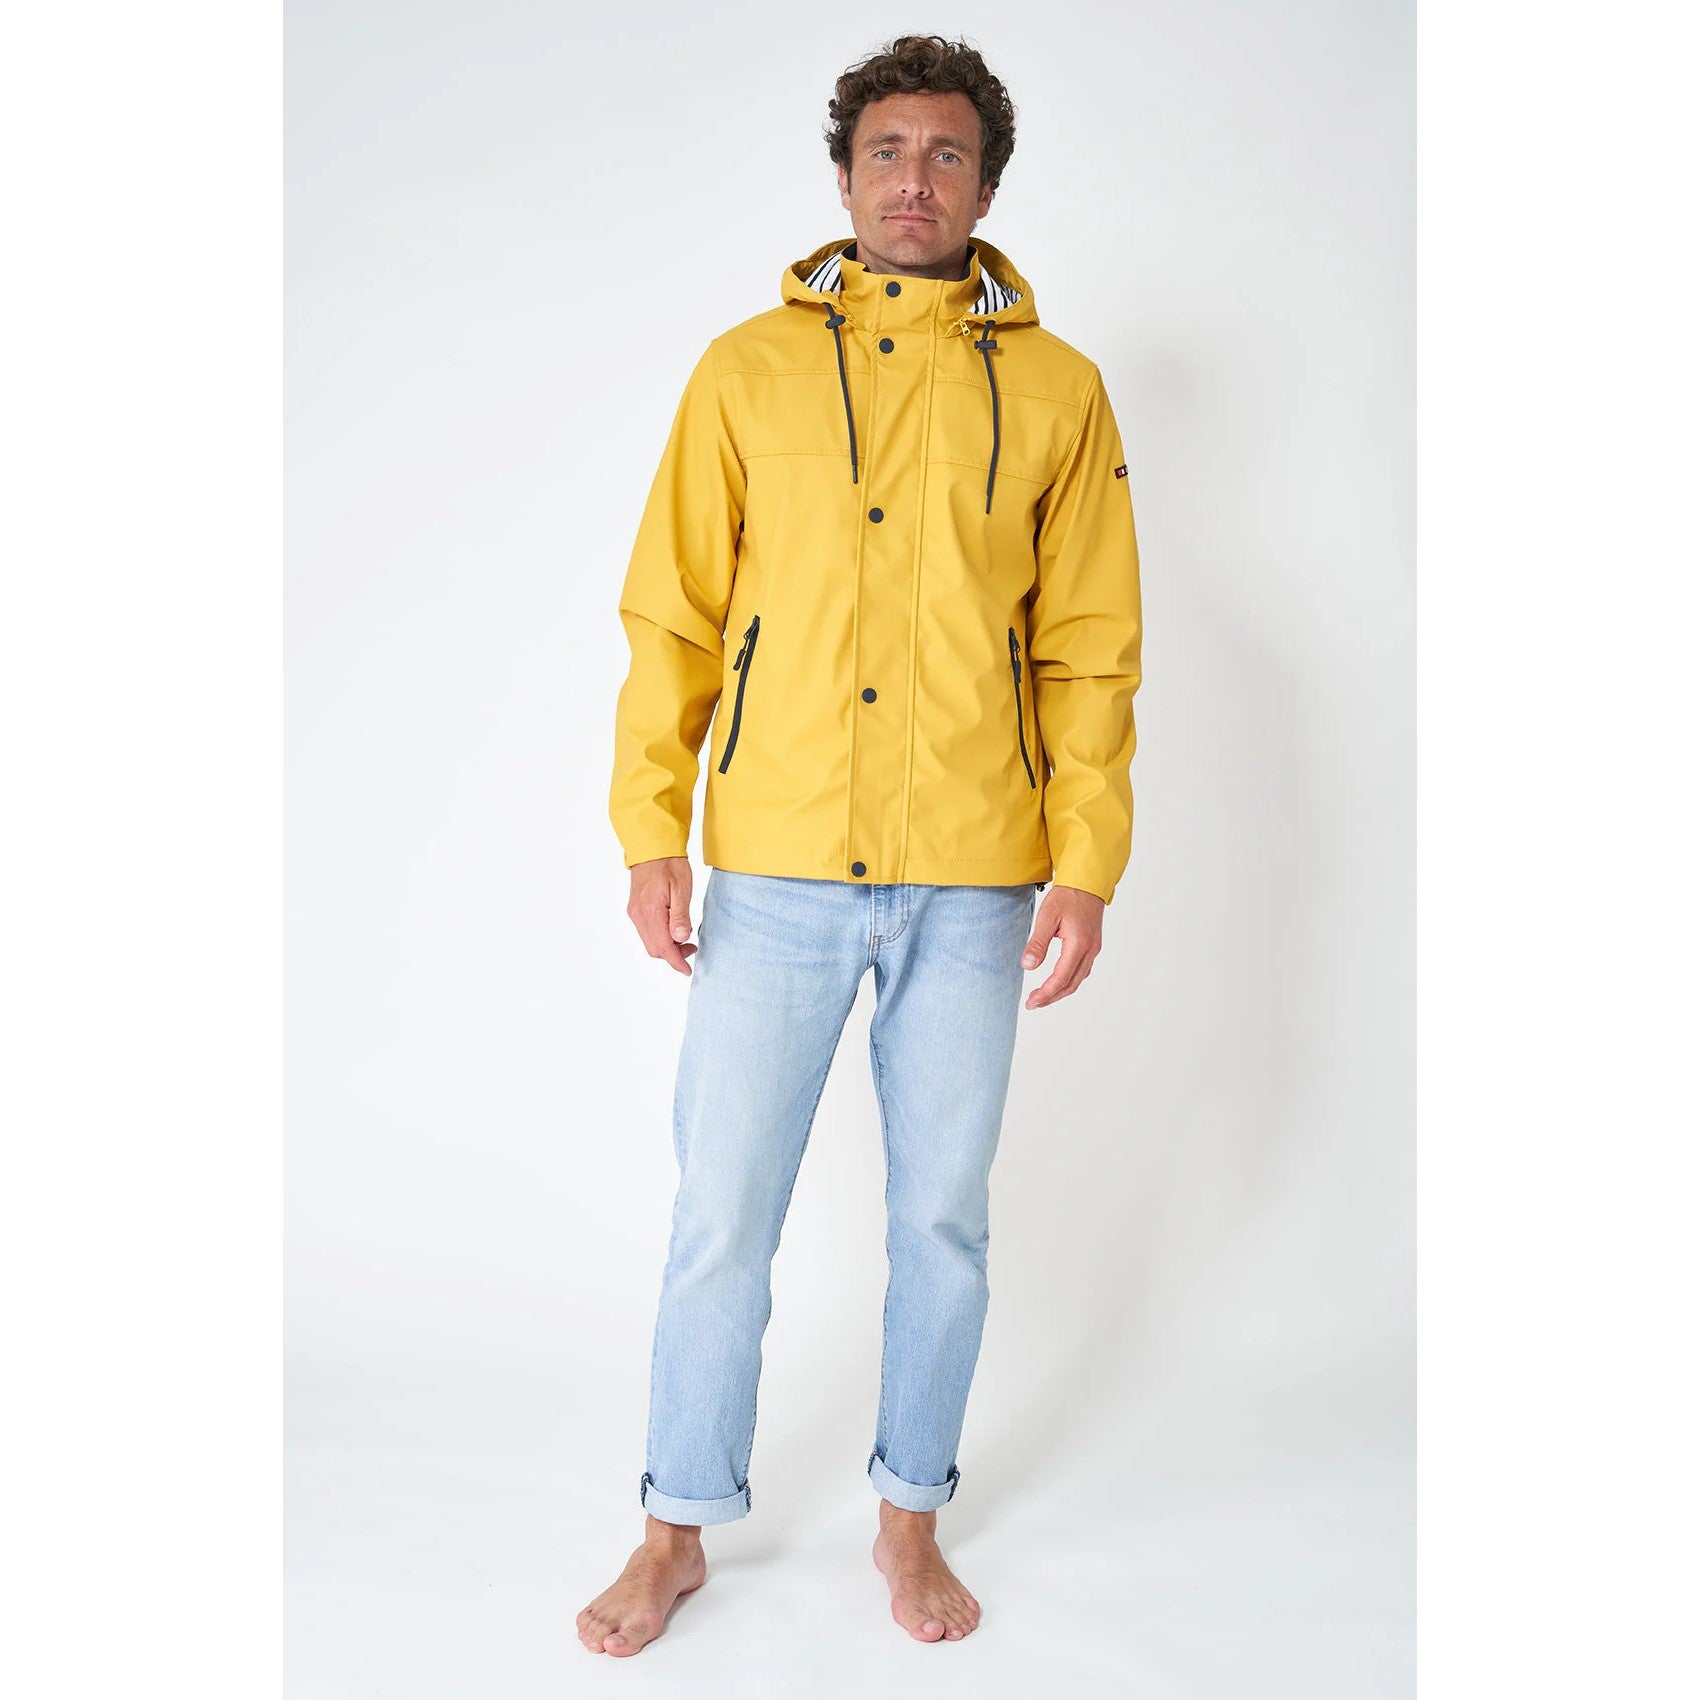 Raincoat with Striped Cotton Lining for Men